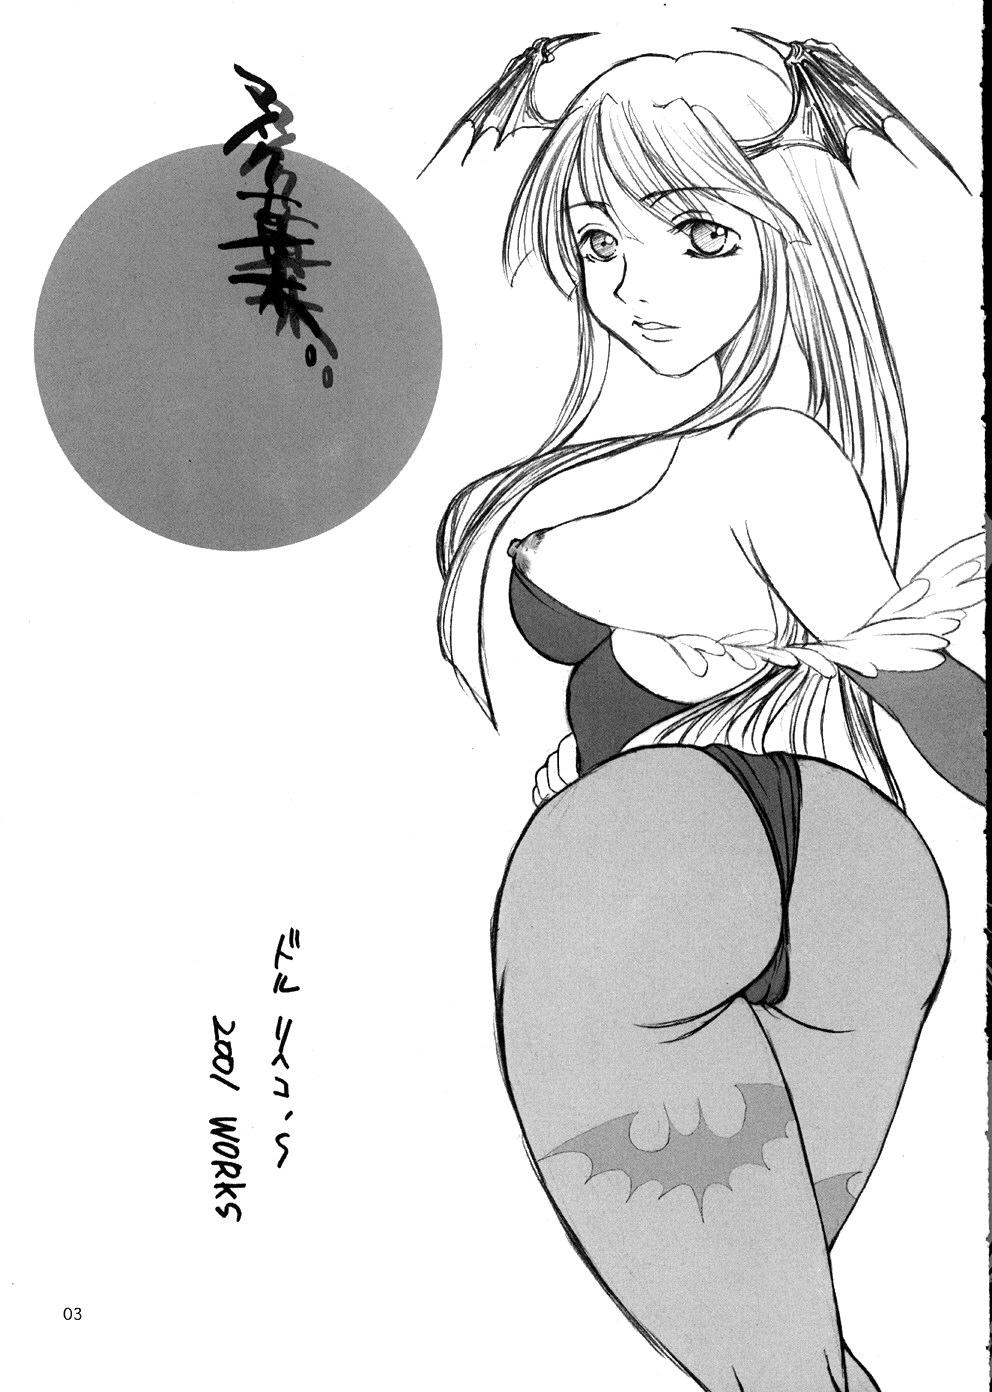 Bulge Maiku Maki - King of fighters Final fight Real Amateur Porn - Page 2